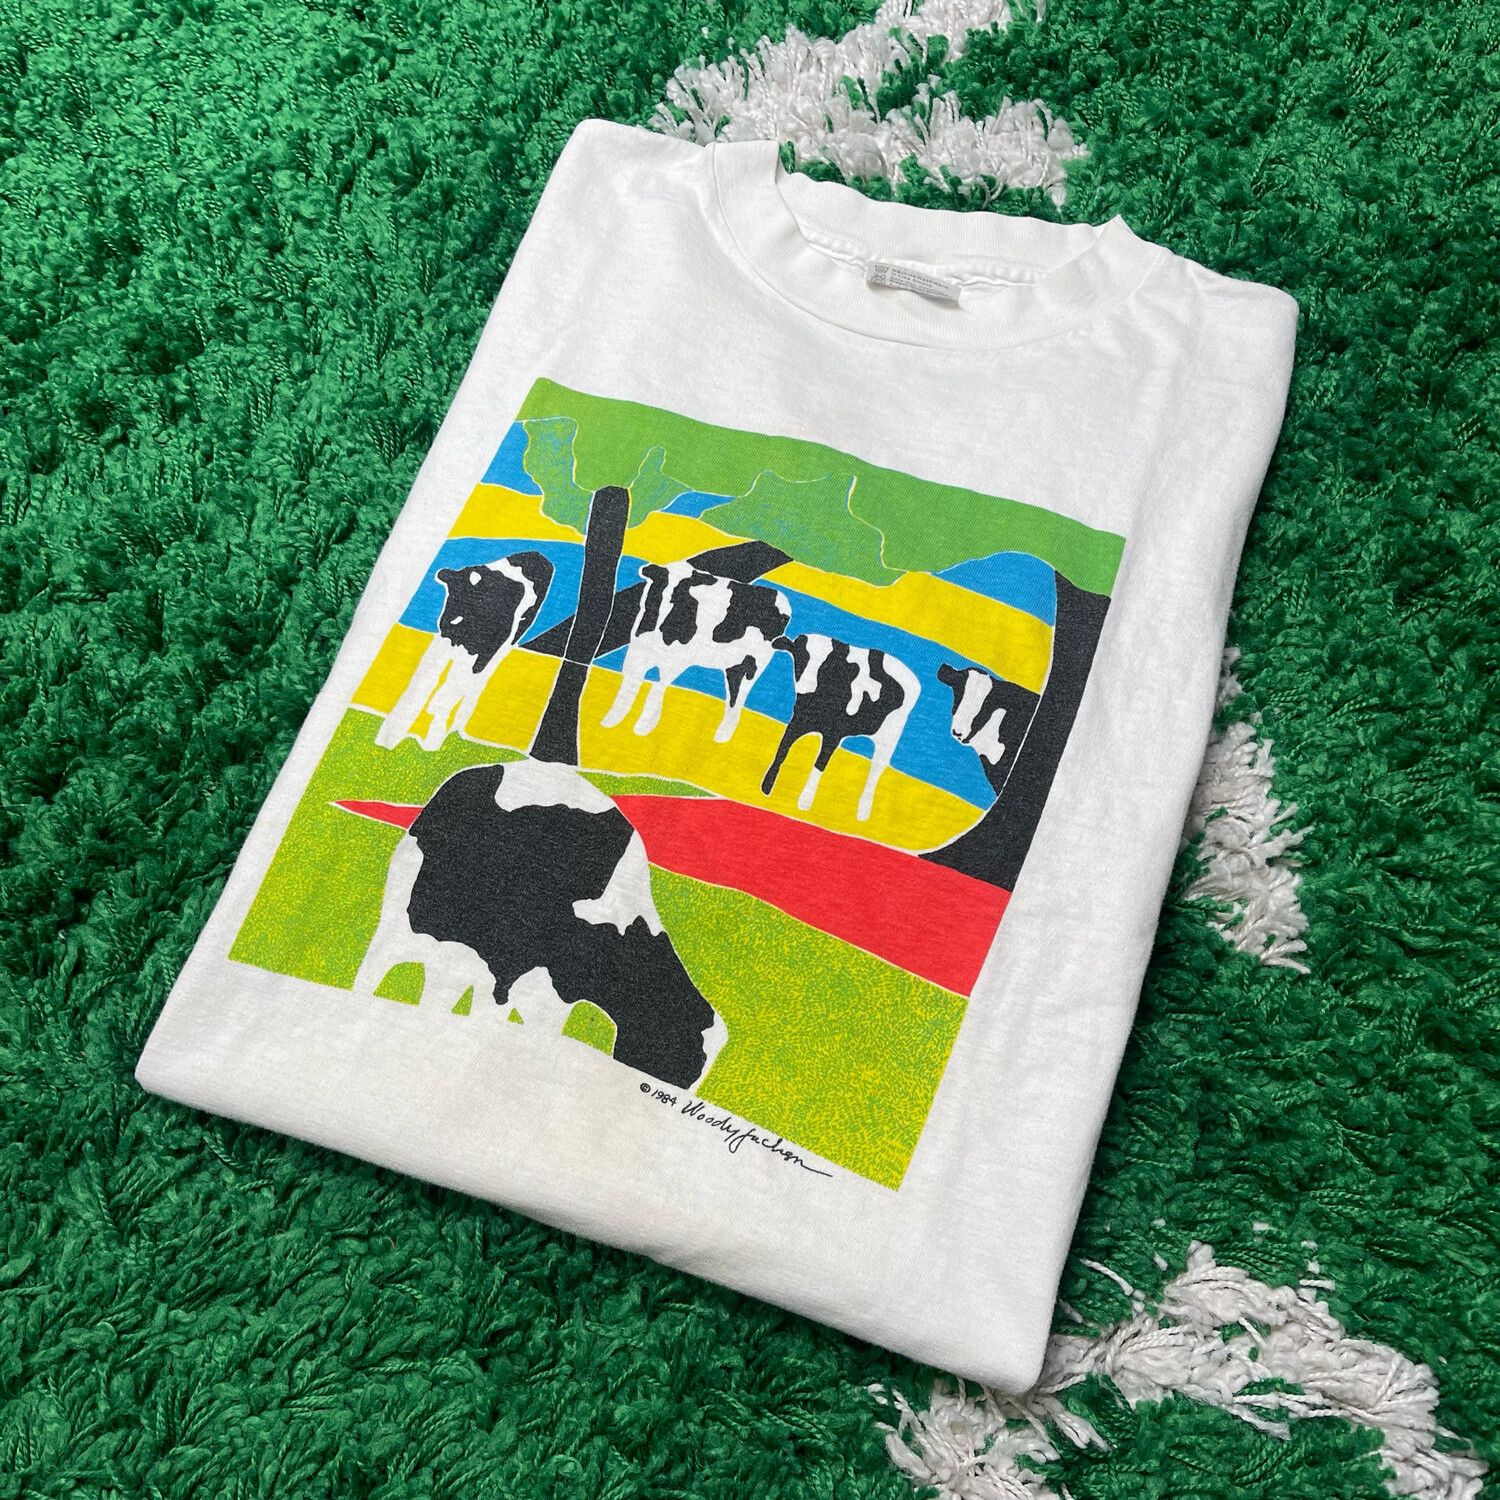 Cow 1984 Tee Size XL